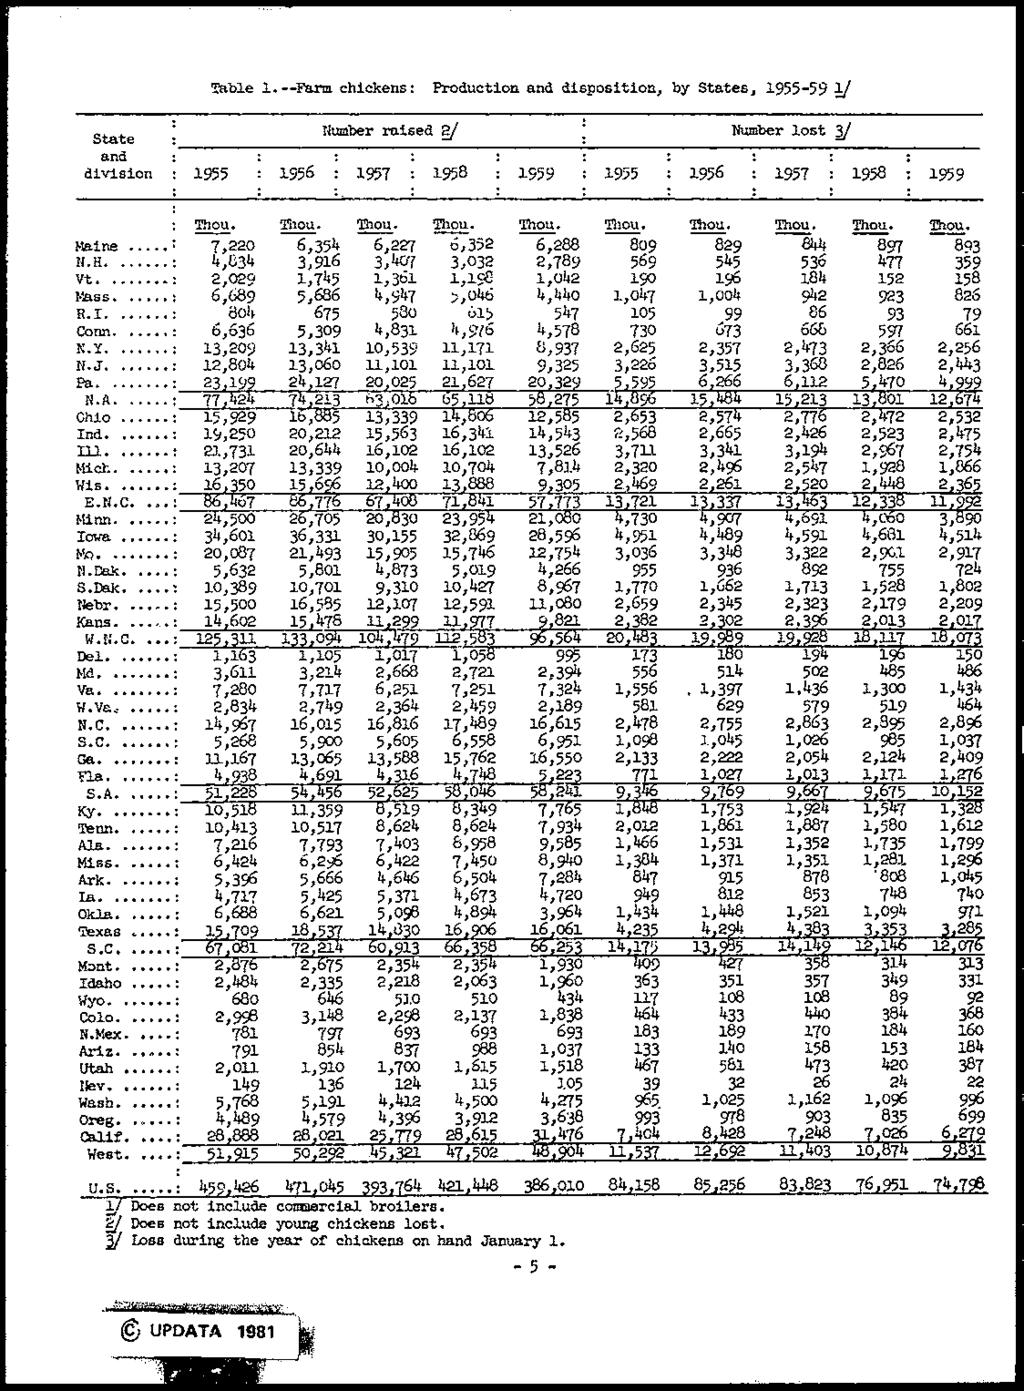 Table 1.--Farm chickens: Production and disposition, by States, 1955-59 ~ Number raised gj Number lost 21 State and division 1955 1956 1957., 1958 1959 1955 1956 1957 1958 1959 Thou.